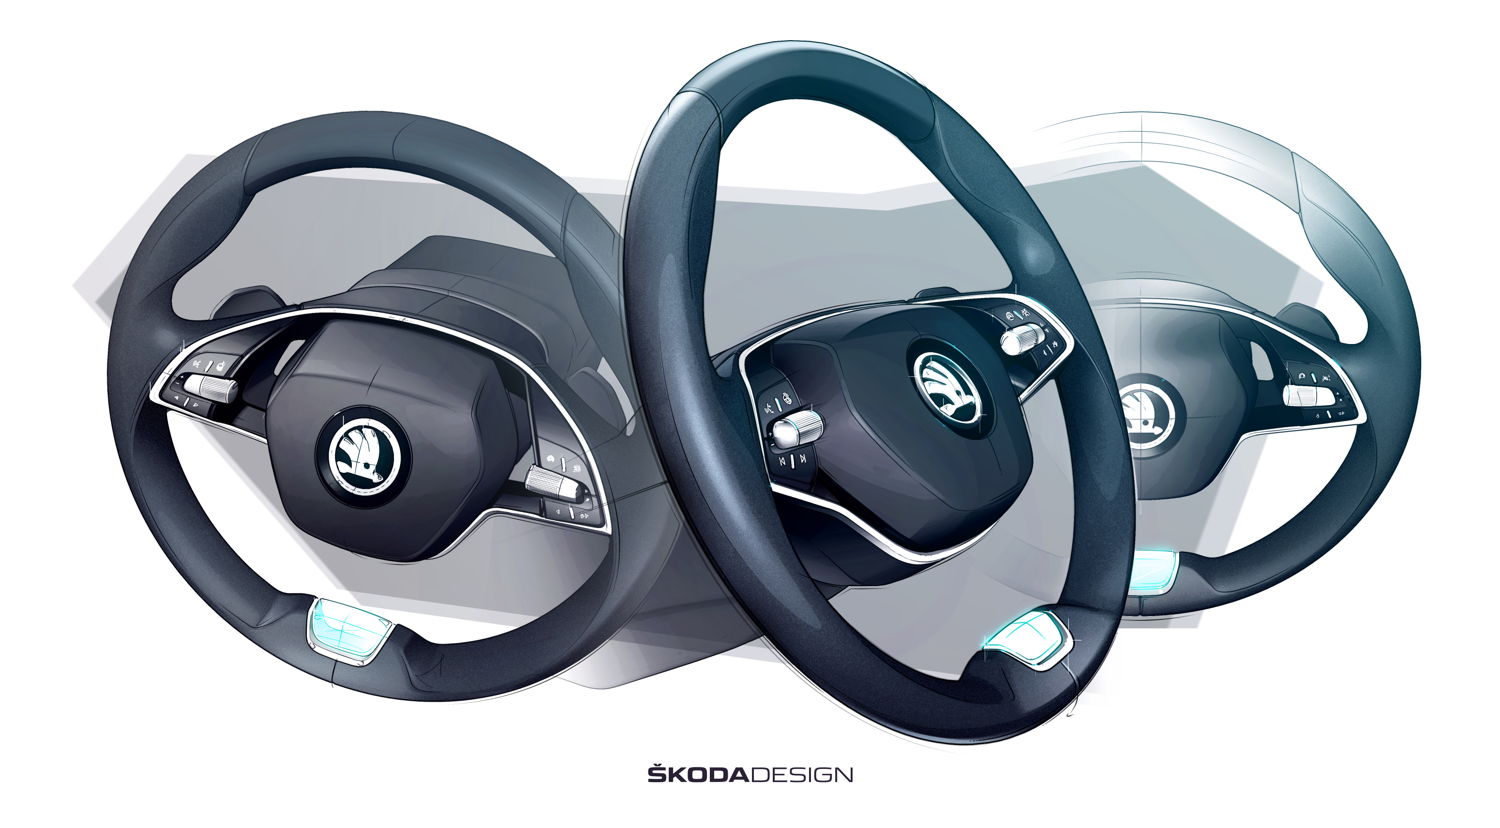 The new interior concept for the ŠKODA OCTAVIA also
includes a two-spoke steering wheel with buttons and scroll
wheels that make for superior ergonomics.